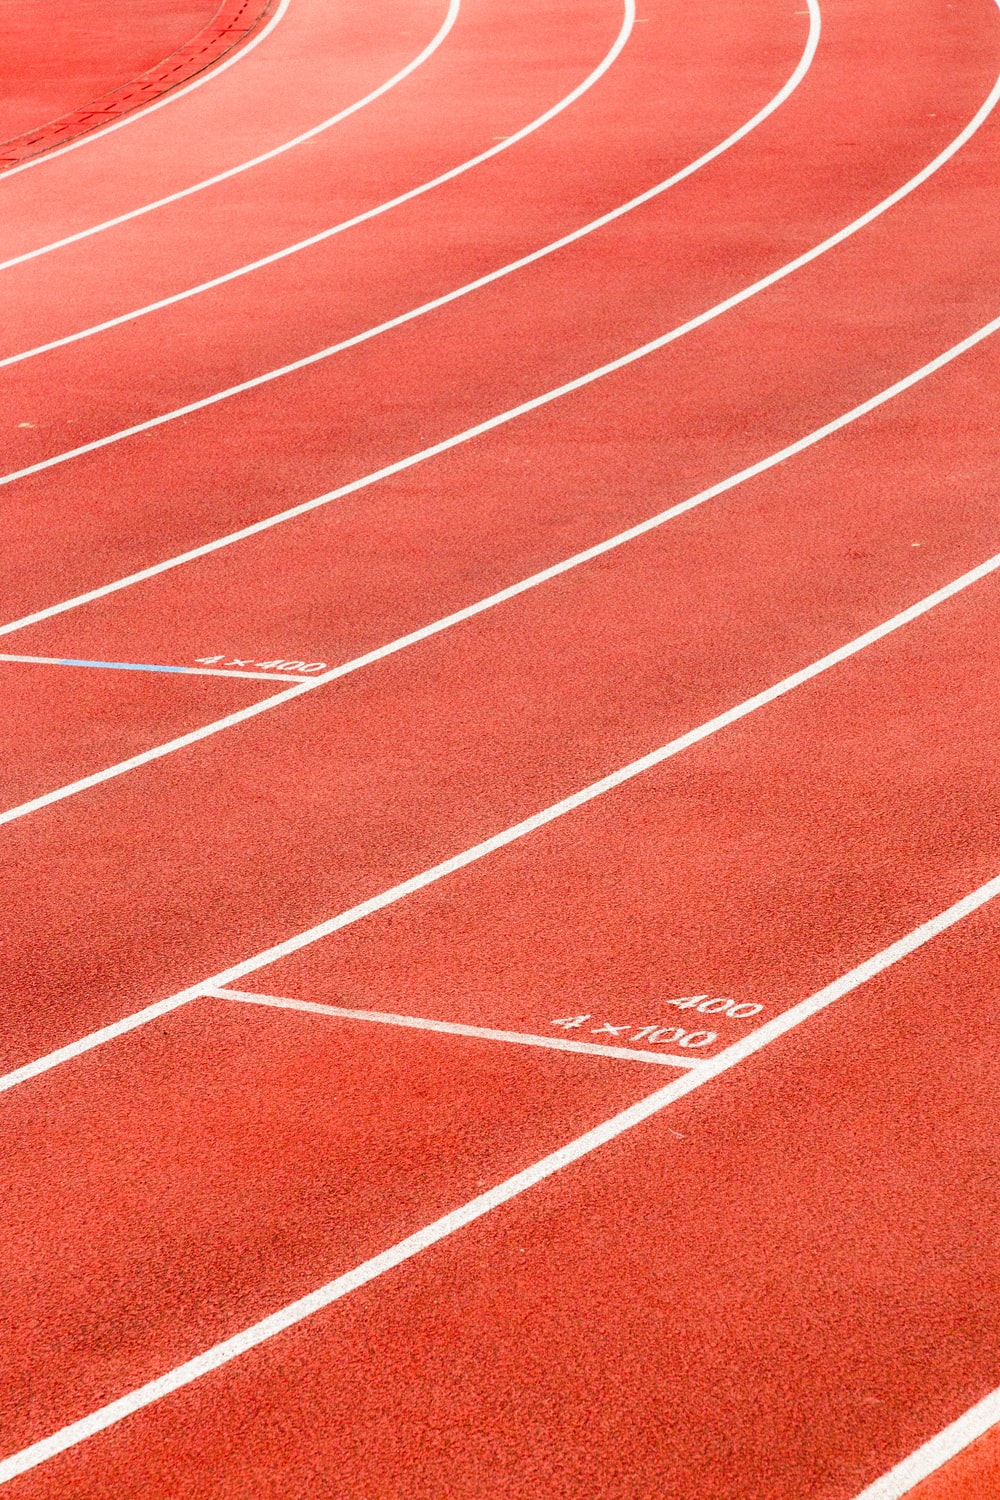 Running Track Picture. Download Free Image